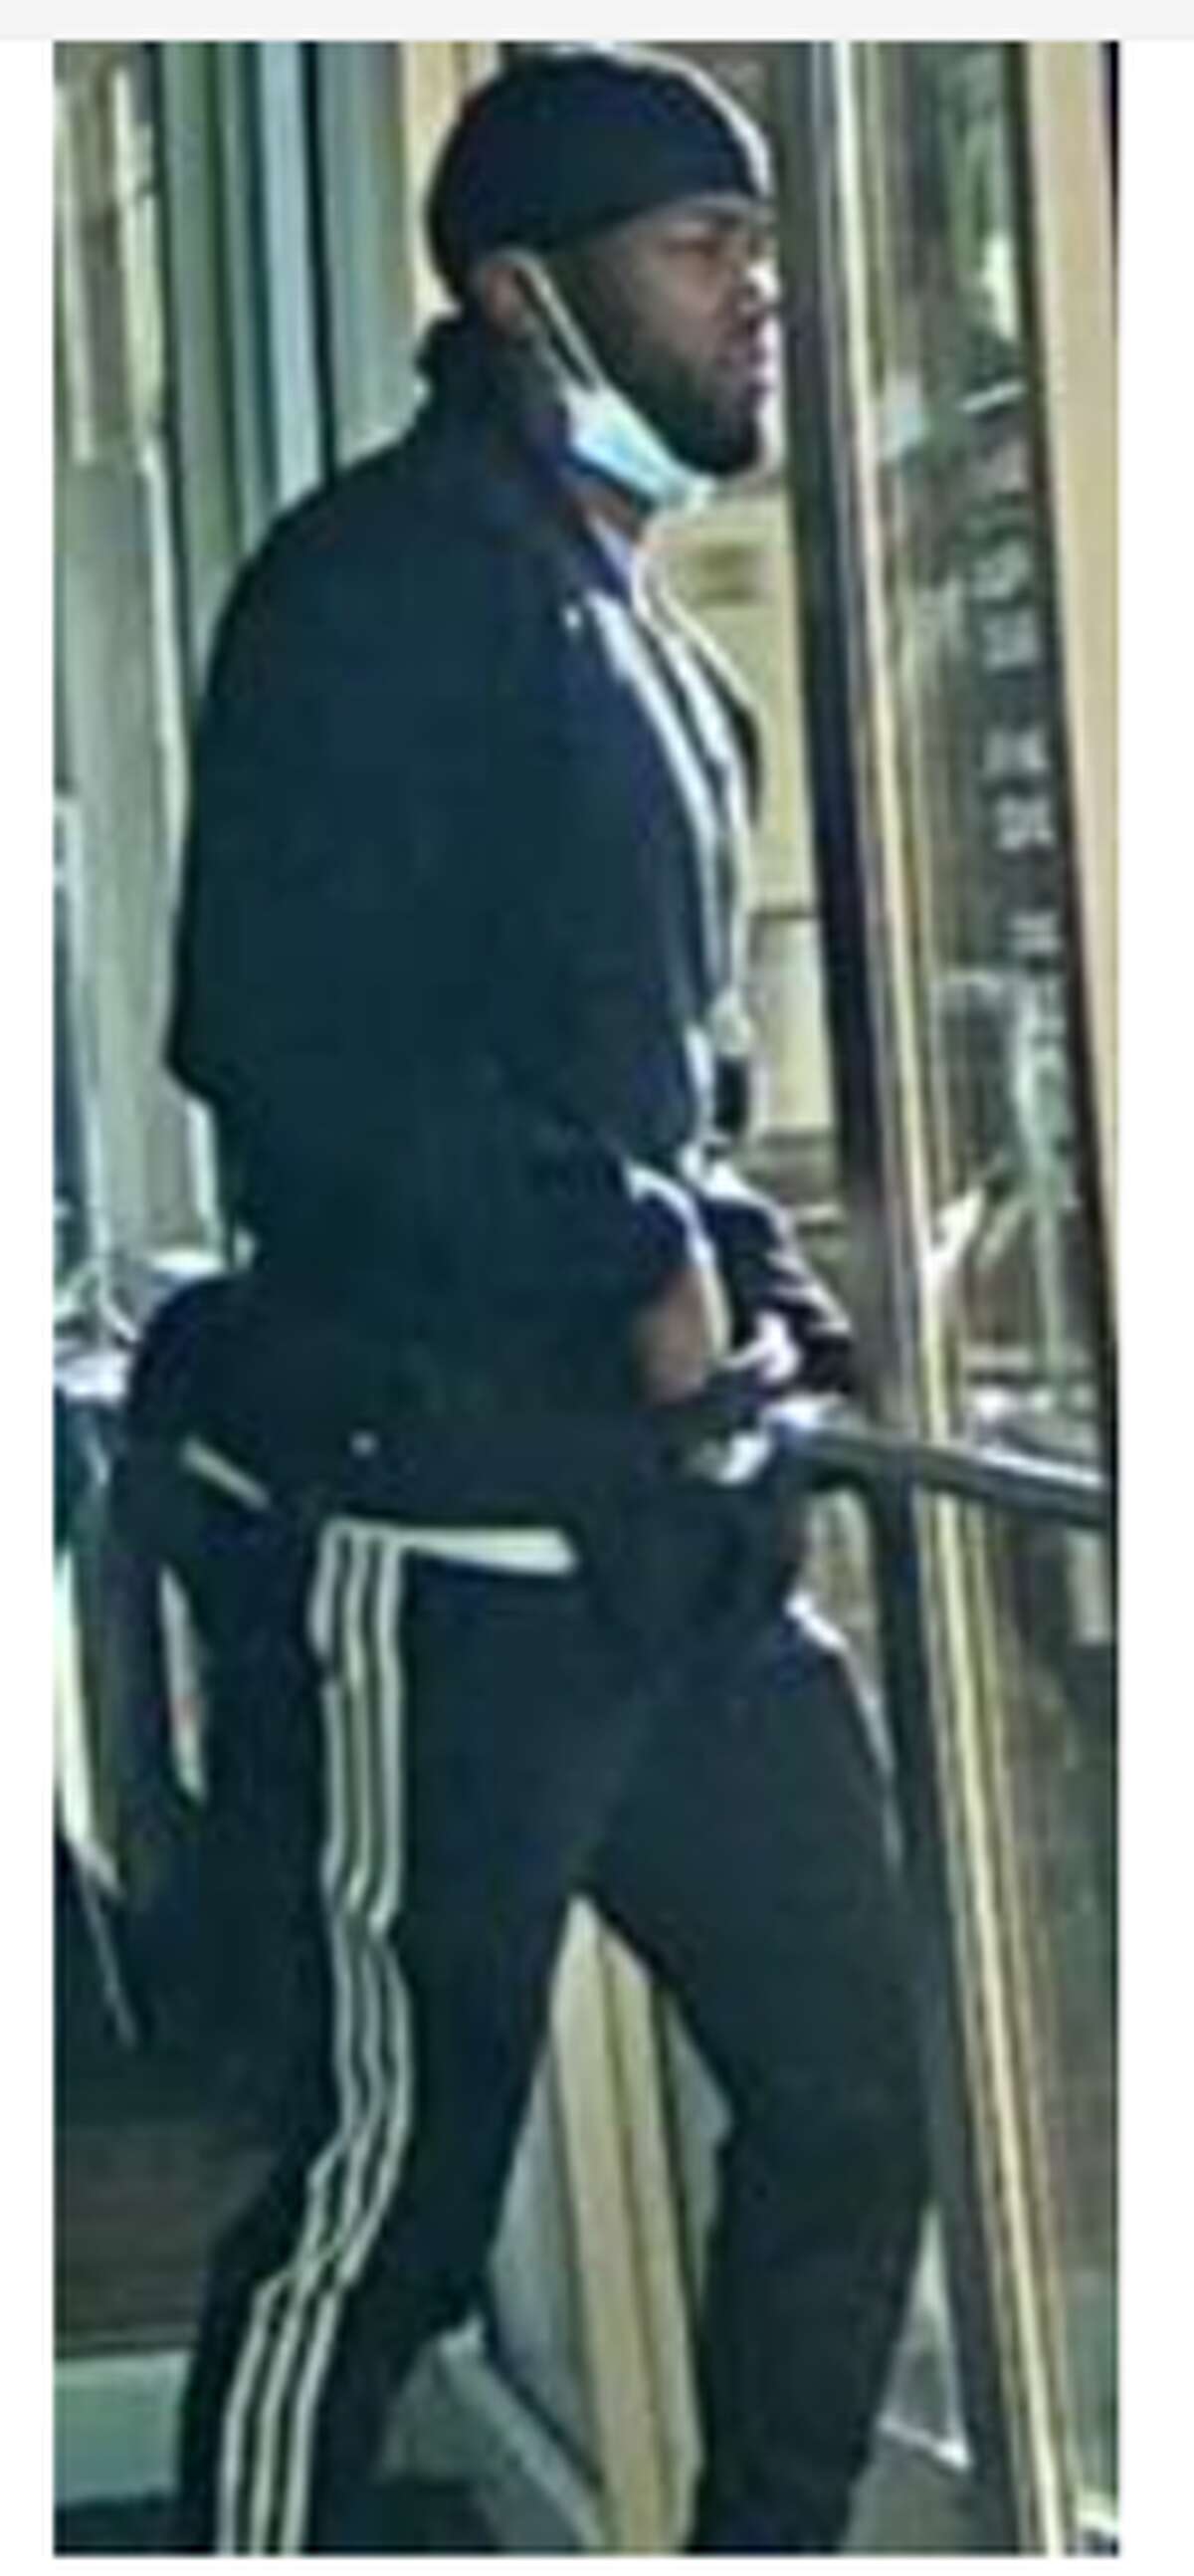 New Haven police released photos of a man they say robbed a TD Bank on Foxon Boulevard on Oct. 29.